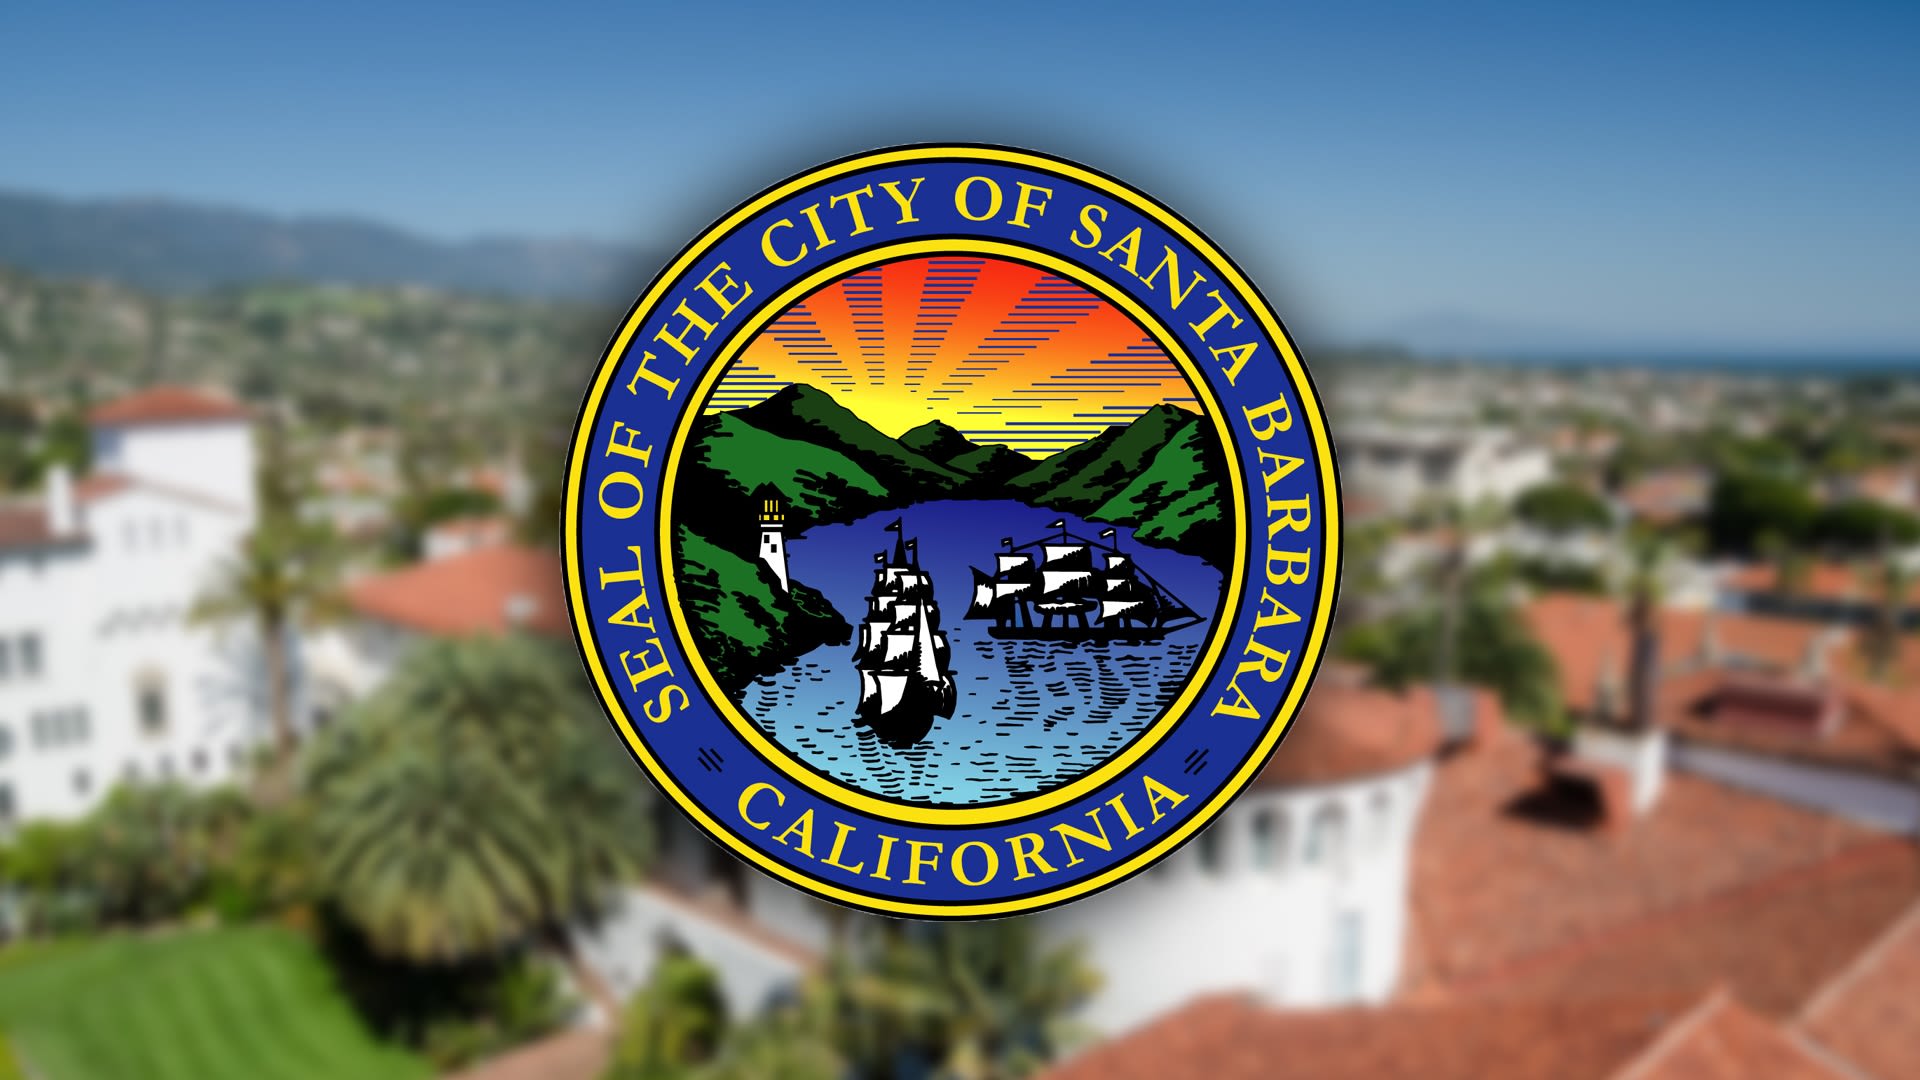 City of Santa Barbara releases sales tax results for quarter and transient tax results for April